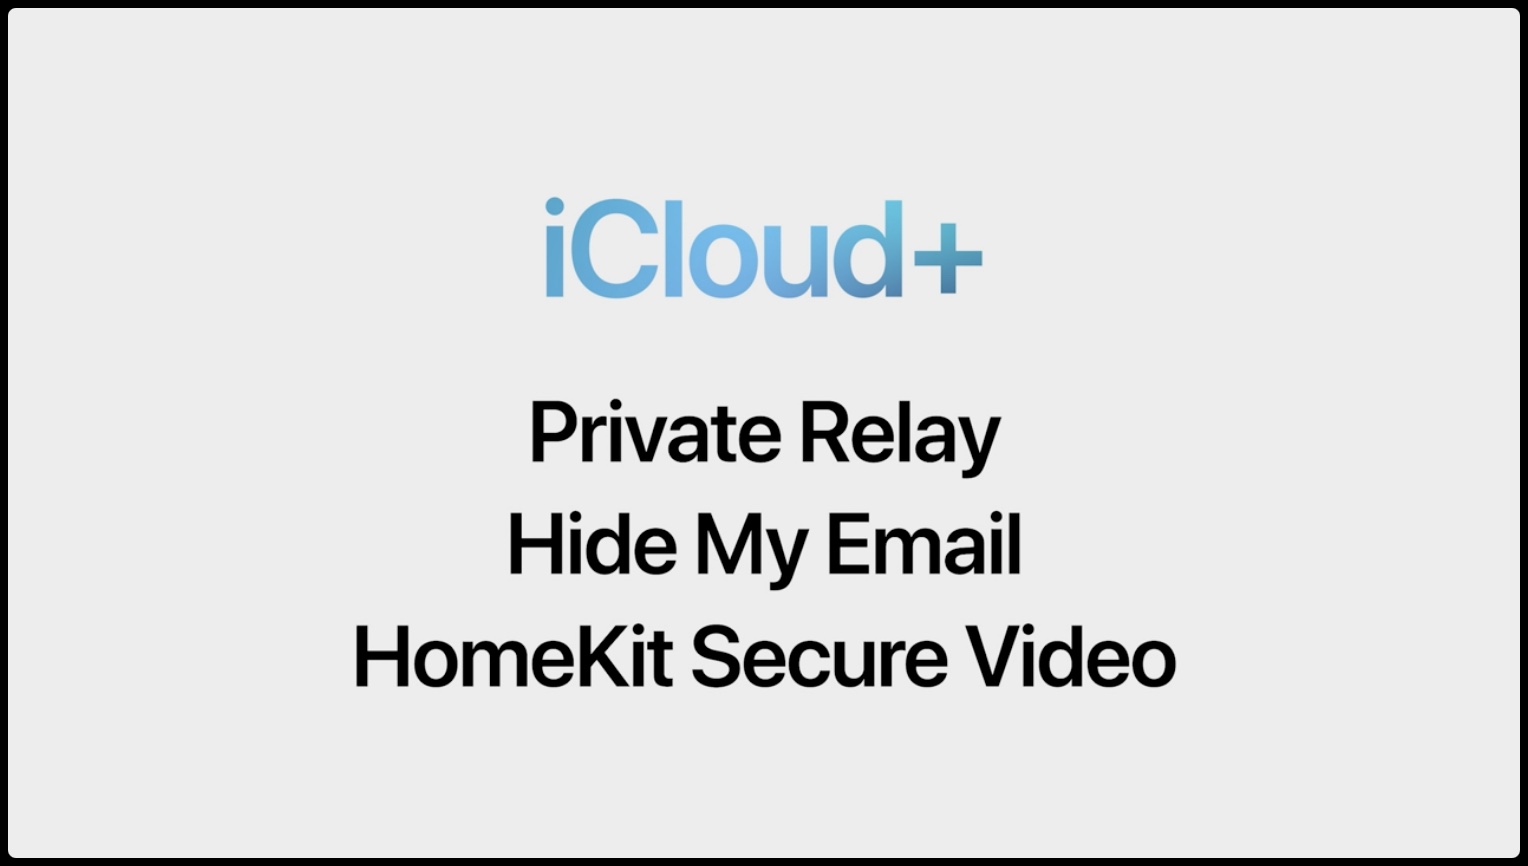 Apple's marketing image showing the names of iCloud+ perks like Private Relay